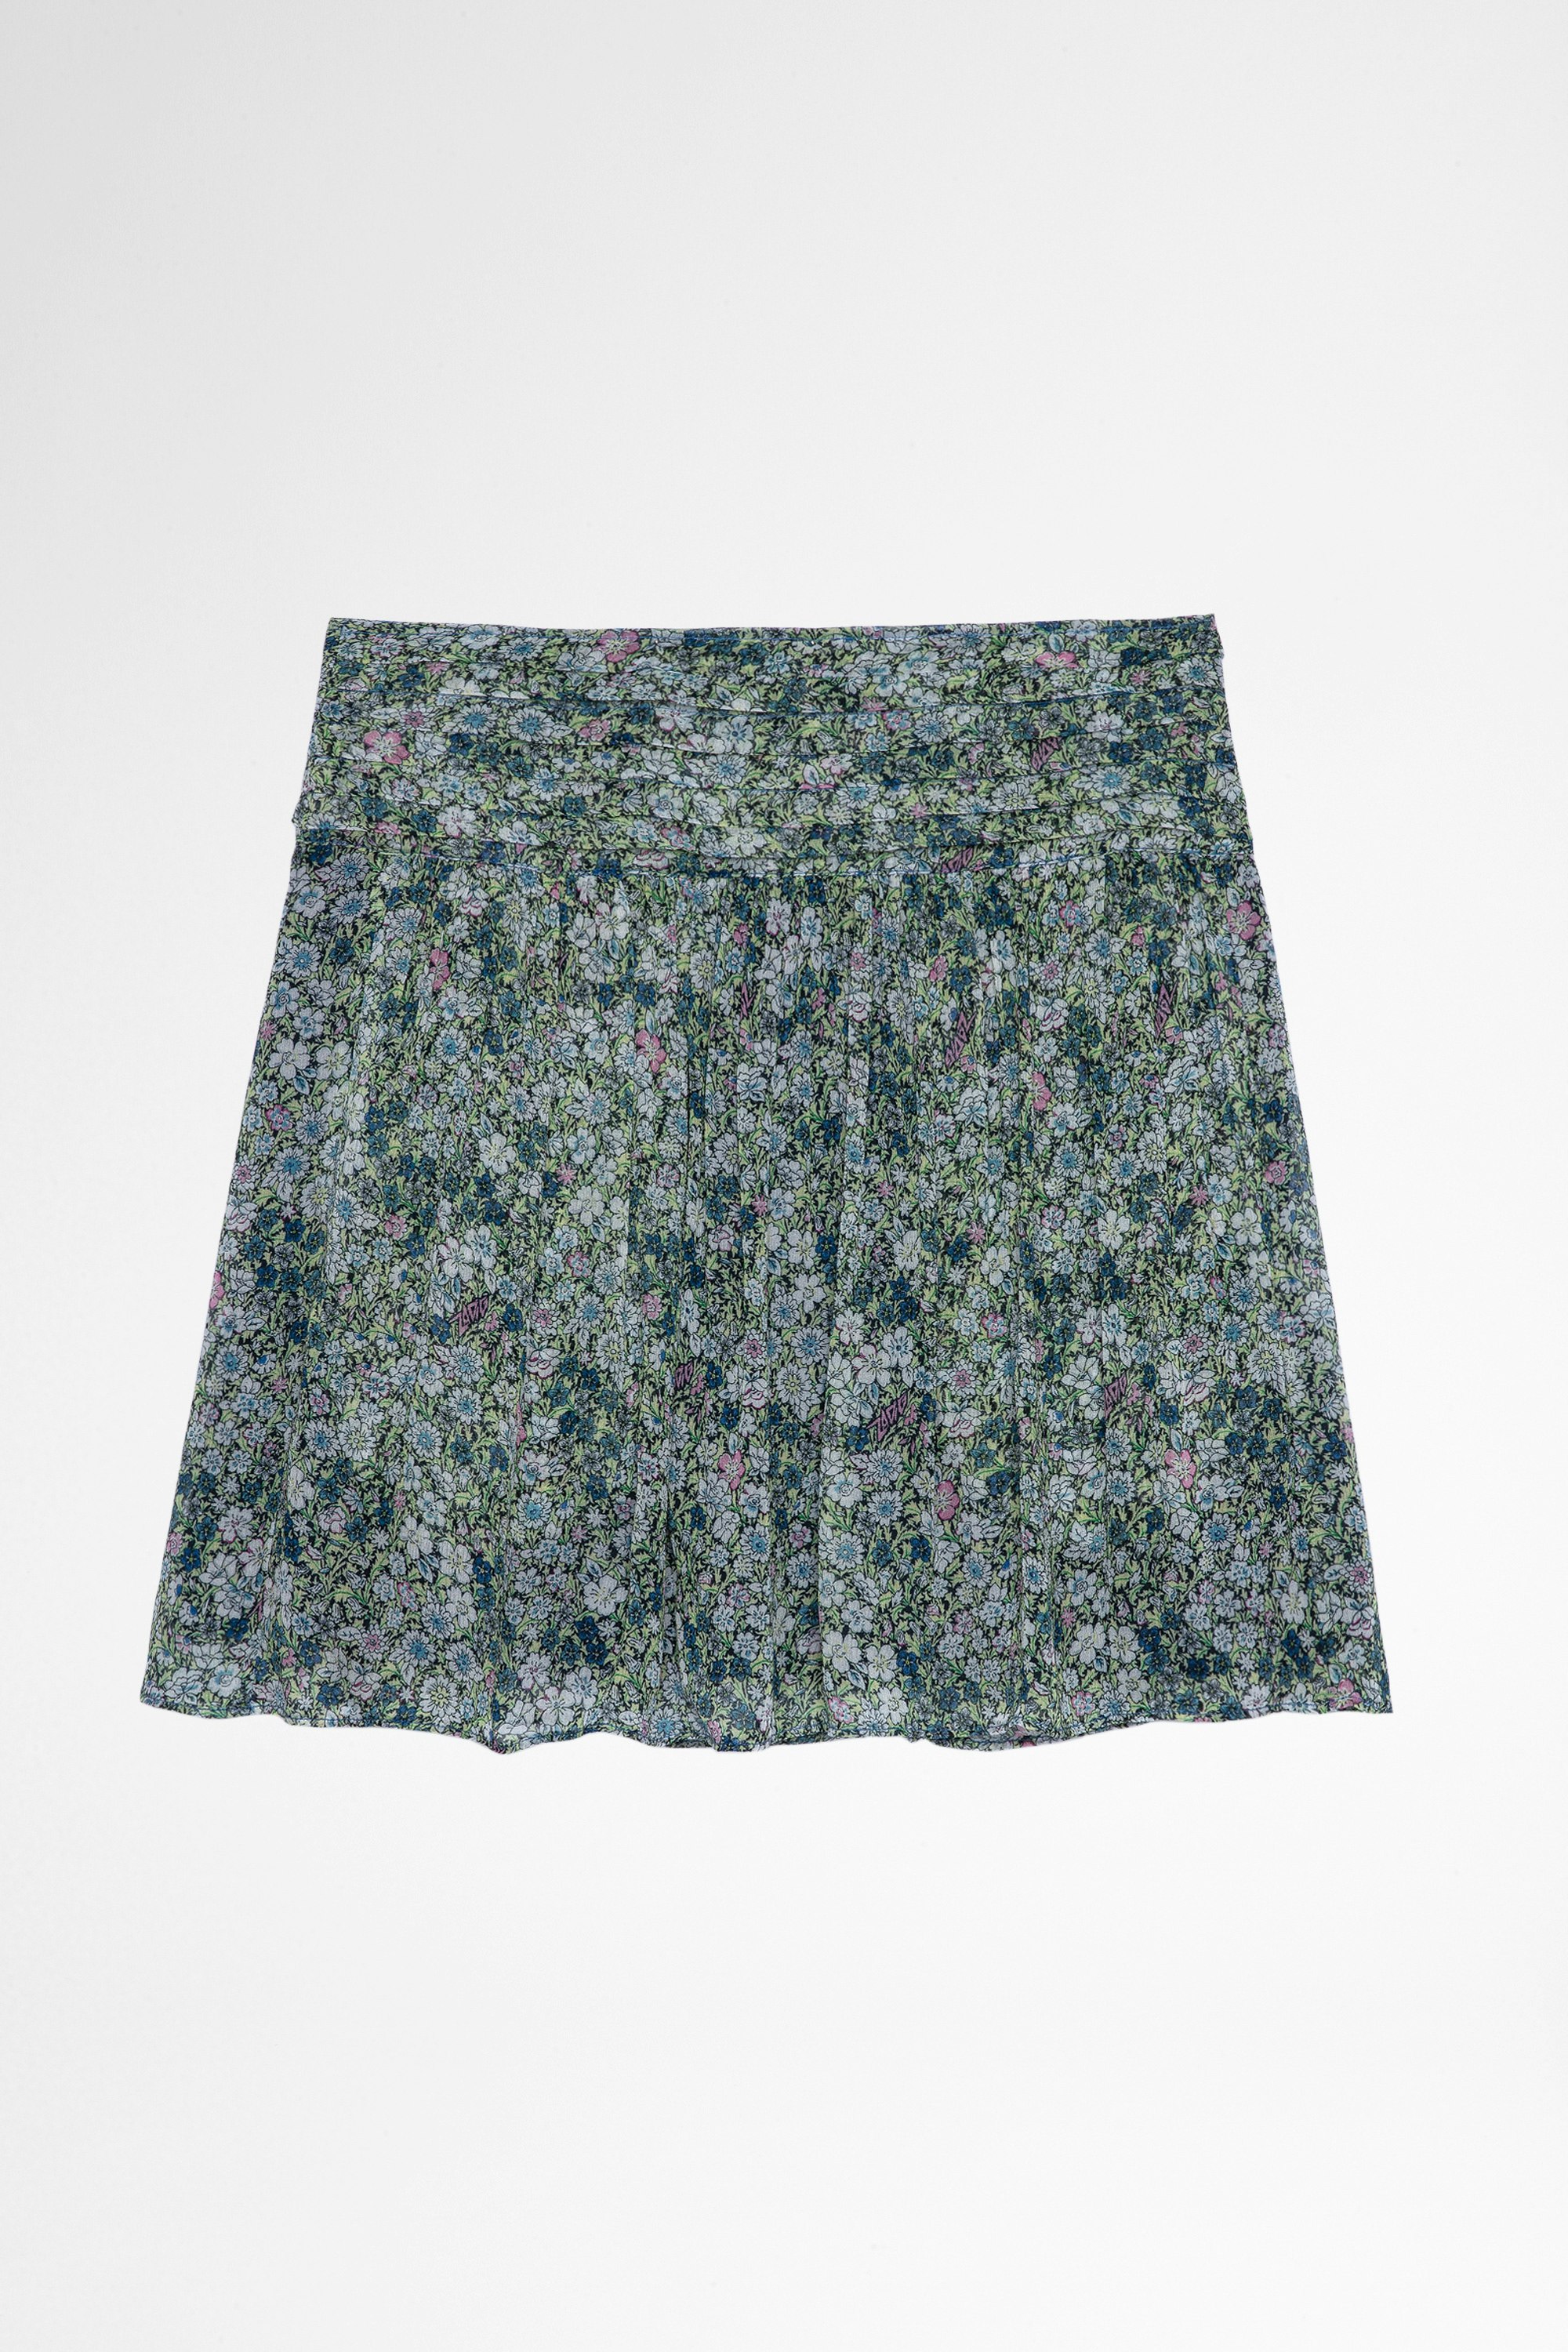 Javala スカート Women's short skirt with floral print